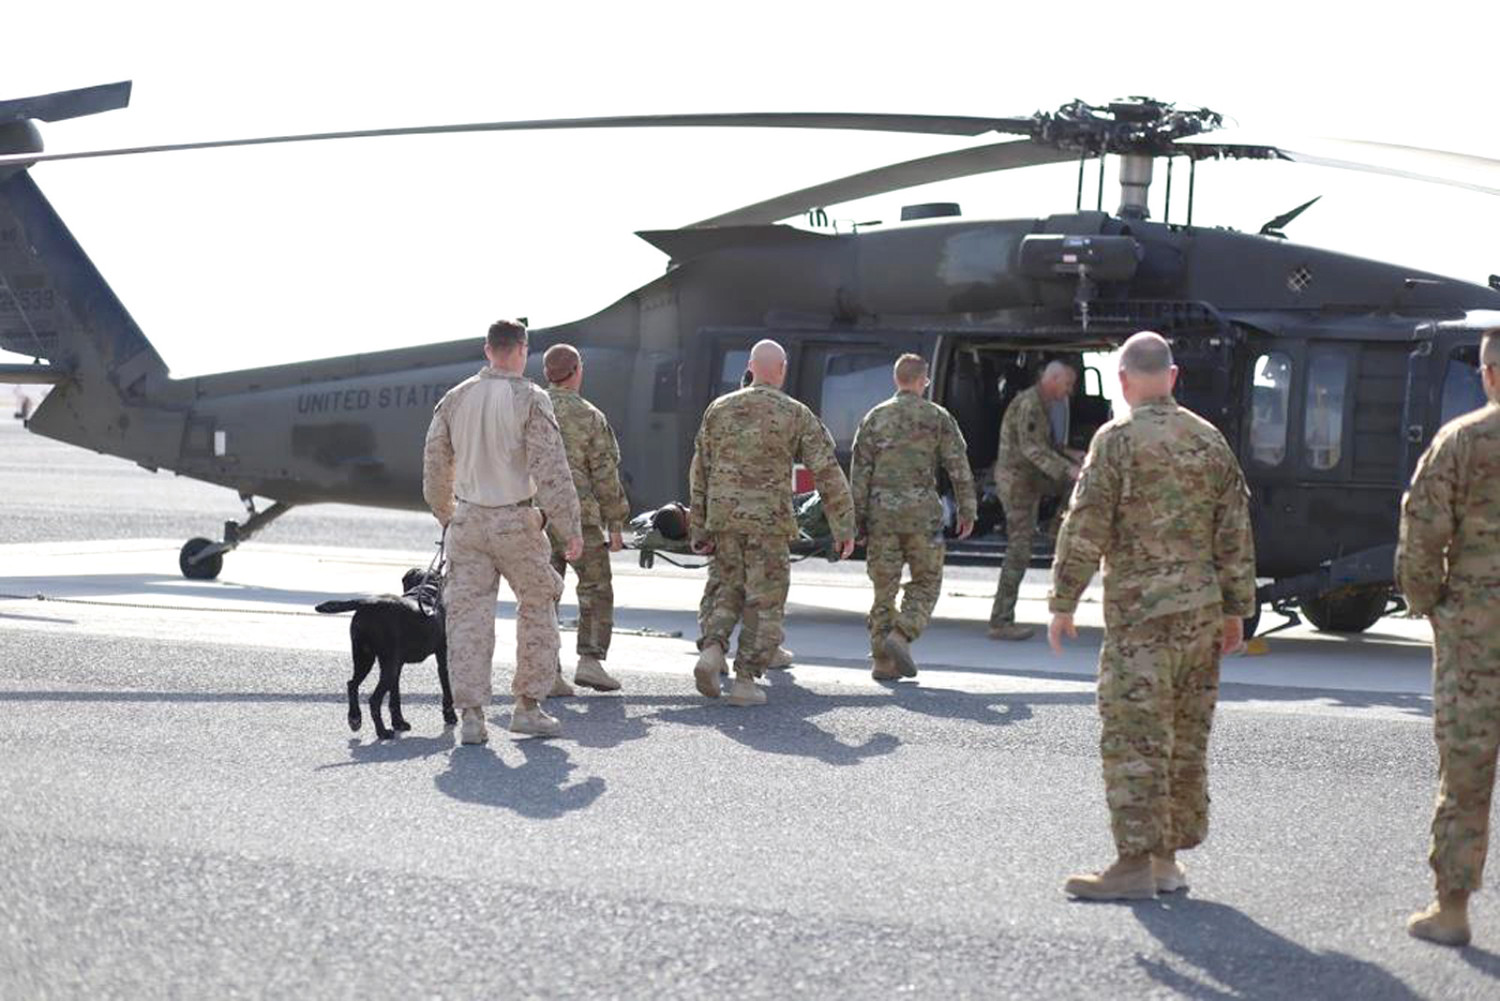 ALL ABOARD: Soldiers assigned to the 1st battalion, 126th aviation regiment join Marines as they gather around a UH-60 Blackhawk helicopter to conduct medical evaluation training using military working dogs in January at Camp Buehring in Kuwait. (Submitted U.S. Army photo by Spc. Devin Flemming)